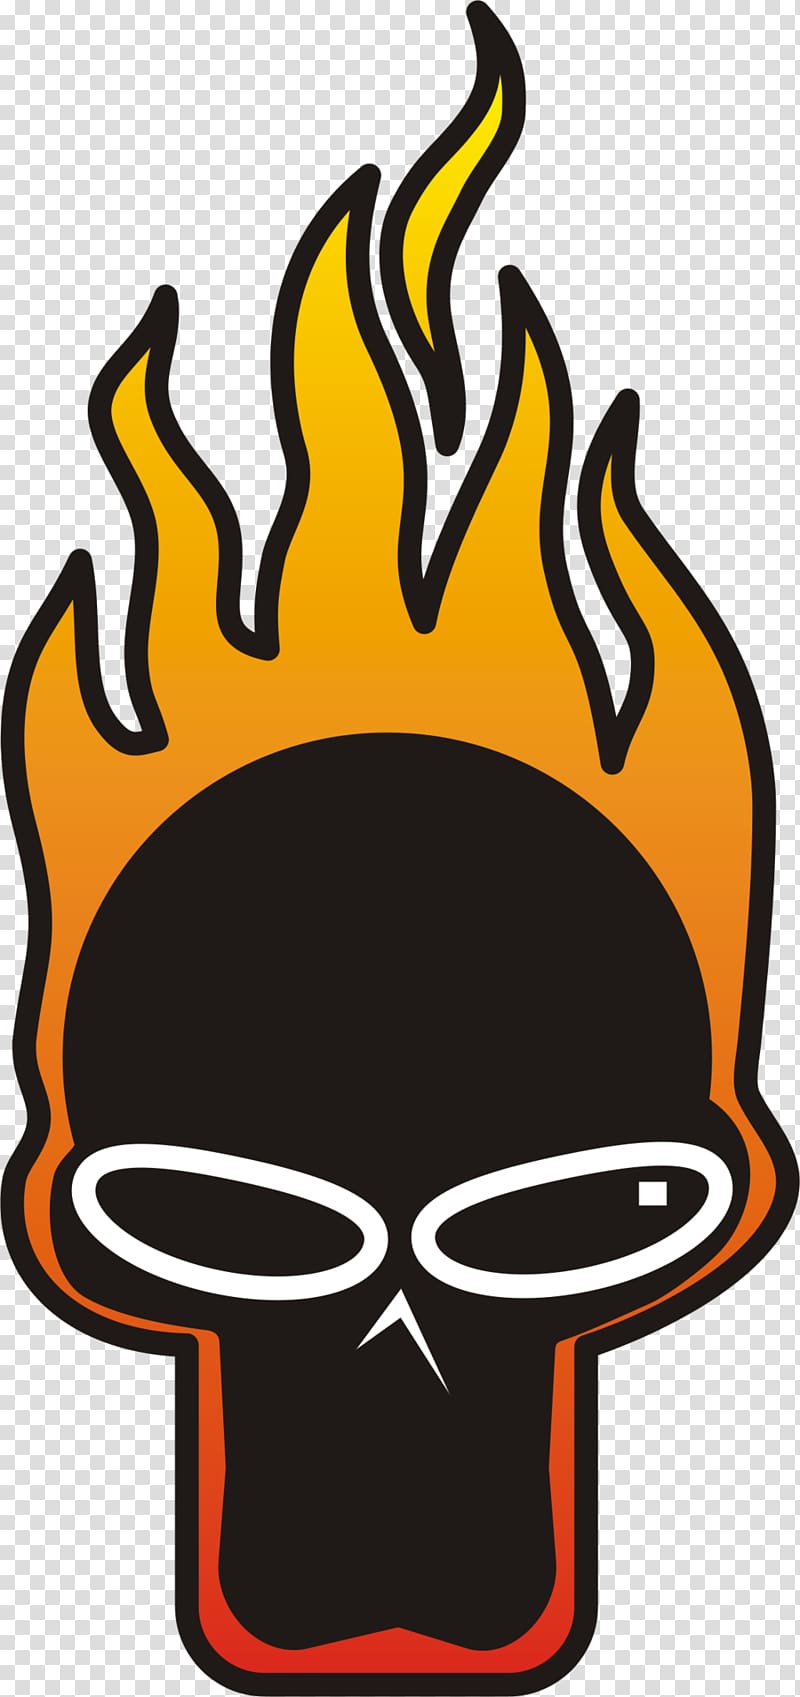 Skull Flame Facial hair Headgear , flame skull transparent background PNG clipart